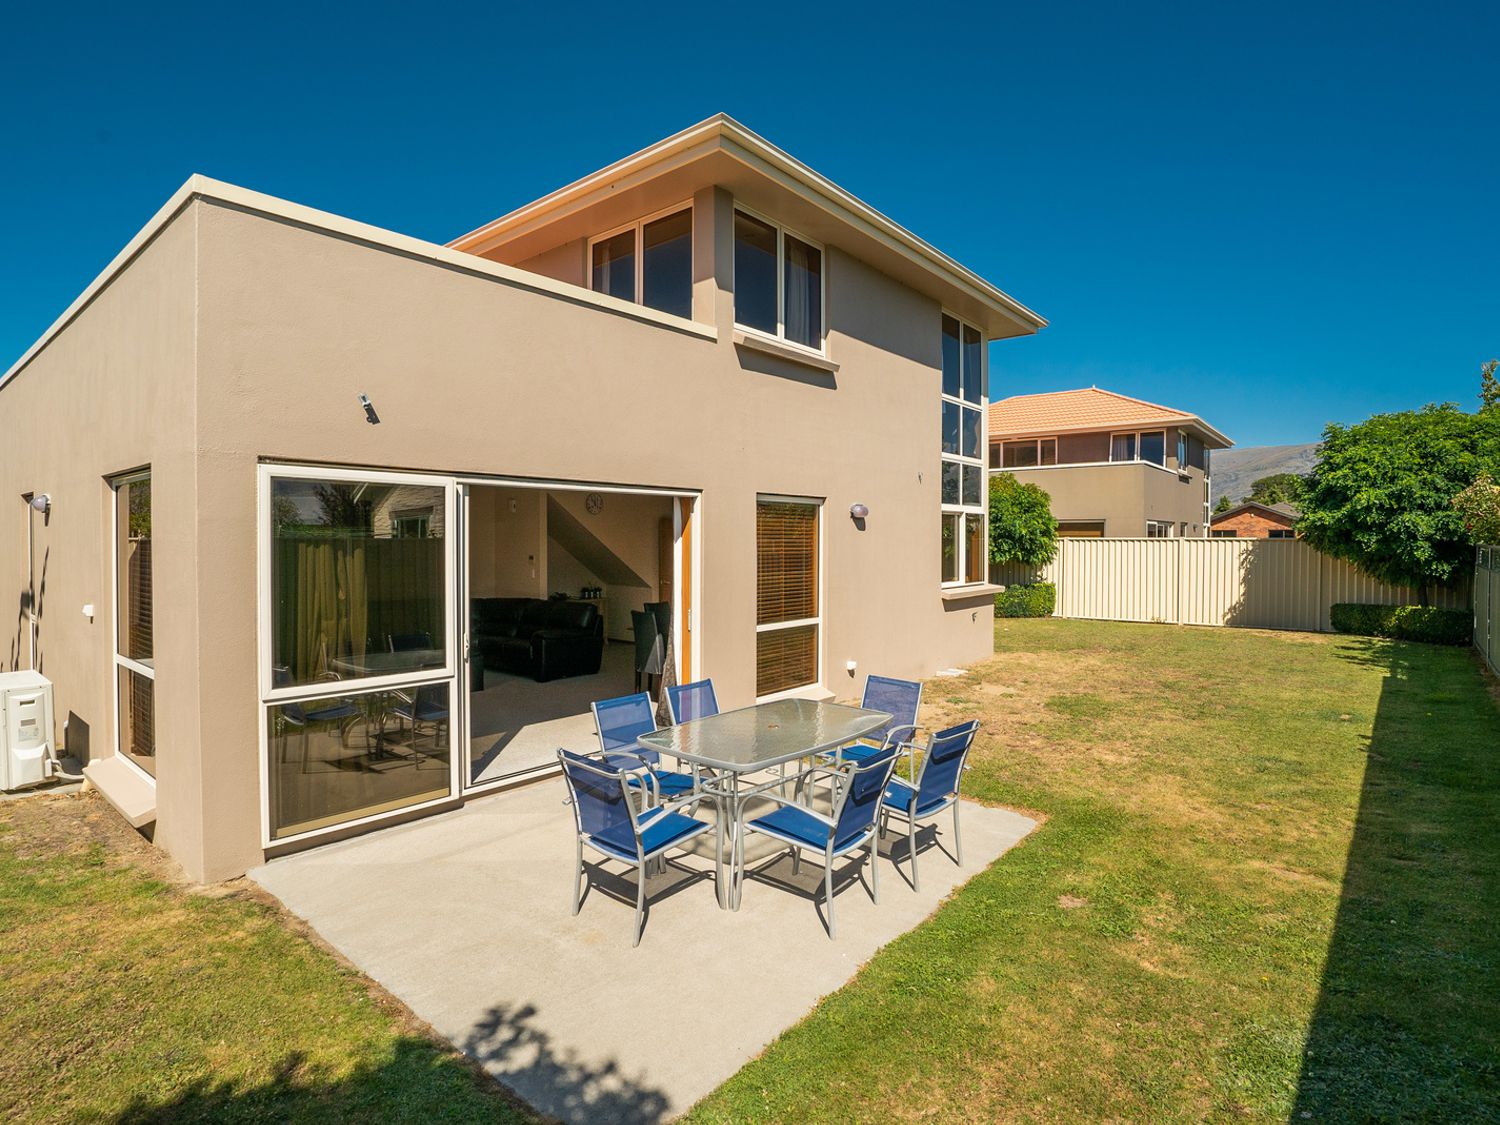 Southern Belle - Cromwell Holiday Home -  - 1066750 - photo 1